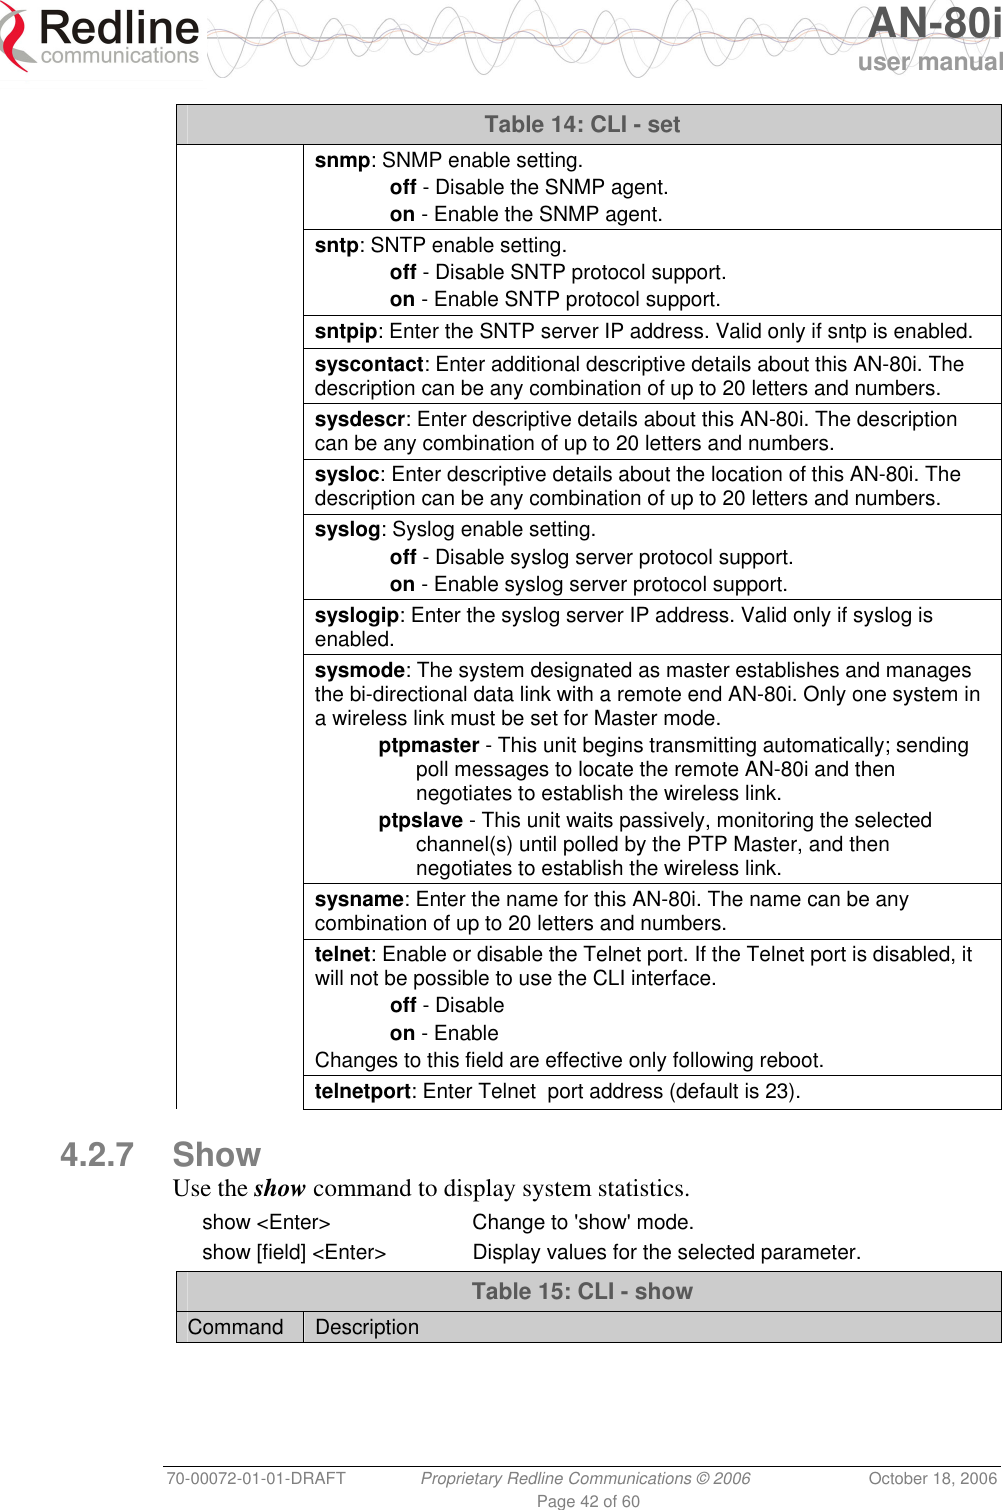   AN-80i user manual 70-00072-01-01-DRAFT  Proprietary Redline Communications © 2006  October 18, 2006 Page 42 of 60 Table 14: CLI - set  snmp: SNMP enable setting.  off - Disable the SNMP agent.  on - Enable the SNMP agent.  sntp: SNTP enable setting.  off - Disable SNTP protocol support.  on - Enable SNTP protocol support.  sntpip: Enter the SNTP server IP address. Valid only if sntp is enabled.  syscontact: Enter additional descriptive details about this AN-80i. The description can be any combination of up to 20 letters and numbers.  sysdescr: Enter descriptive details about this AN-80i. The description can be any combination of up to 20 letters and numbers.  sysloc: Enter descriptive details about the location of this AN-80i. The description can be any combination of up to 20 letters and numbers.  syslog: Syslog enable setting.  off - Disable syslog server protocol support.  on - Enable syslog server protocol support.  syslogip: Enter the syslog server IP address. Valid only if syslog is enabled.  sysmode: The system designated as master establishes and manages the bi-directional data link with a remote end AN-80i. Only one system in a wireless link must be set for Master mode. ptpmaster - This unit begins transmitting automatically; sending poll messages to locate the remote AN-80i and then negotiates to establish the wireless link. ptpslave - This unit waits passively, monitoring the selected channel(s) until polled by the PTP Master, and then negotiates to establish the wireless link.  sysname: Enter the name for this AN-80i. The name can be any combination of up to 20 letters and numbers.  telnet: Enable or disable the Telnet port. If the Telnet port is disabled, it will not be possible to use the CLI interface.  off - Disable  on - Enable Changes to this field are effective only following reboot.  telnetport: Enter Telnet  port address (default is 23).    4.2.7 Show Use the show command to display system statistics. show &lt;Enter&gt;  Change to &apos;show&apos; mode. show [field] &lt;Enter&gt;  Display values for the selected parameter. Table 15: CLI - show Command  Description 